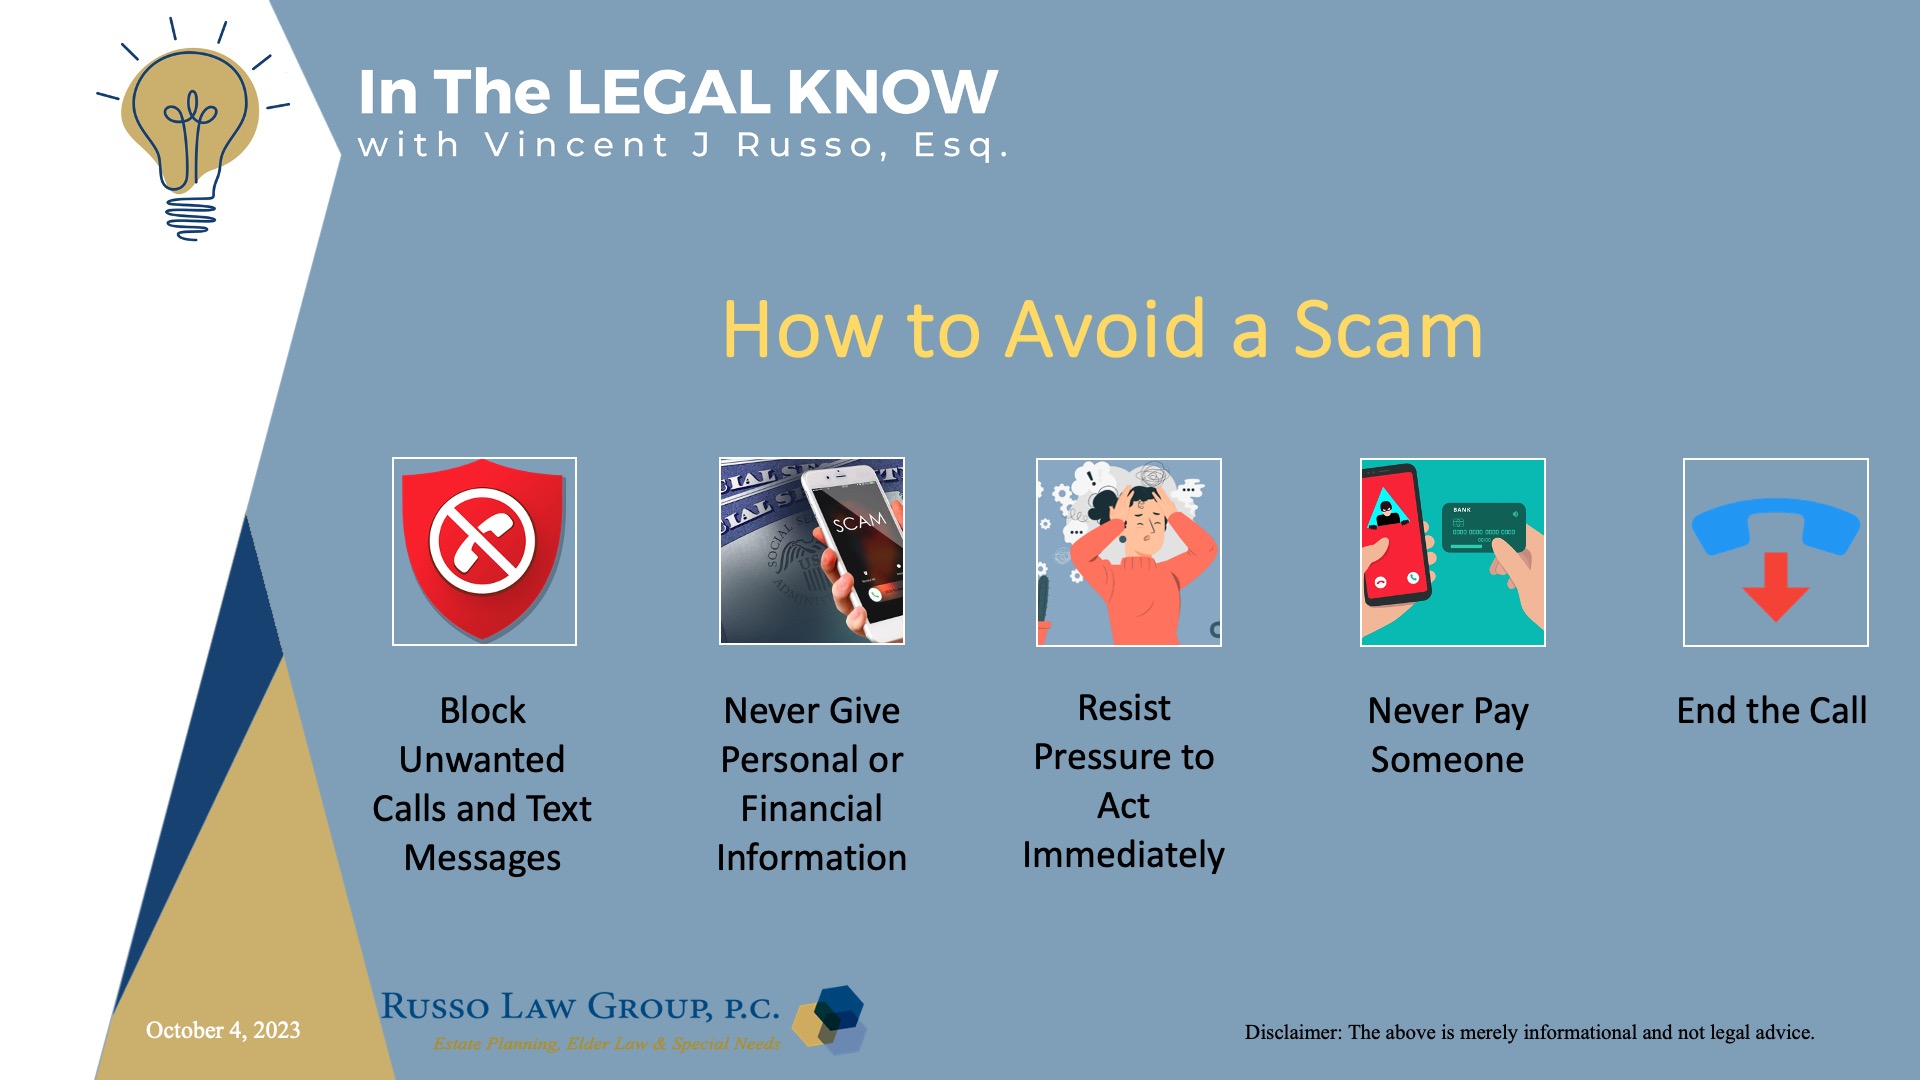 How to Avoid a Scam